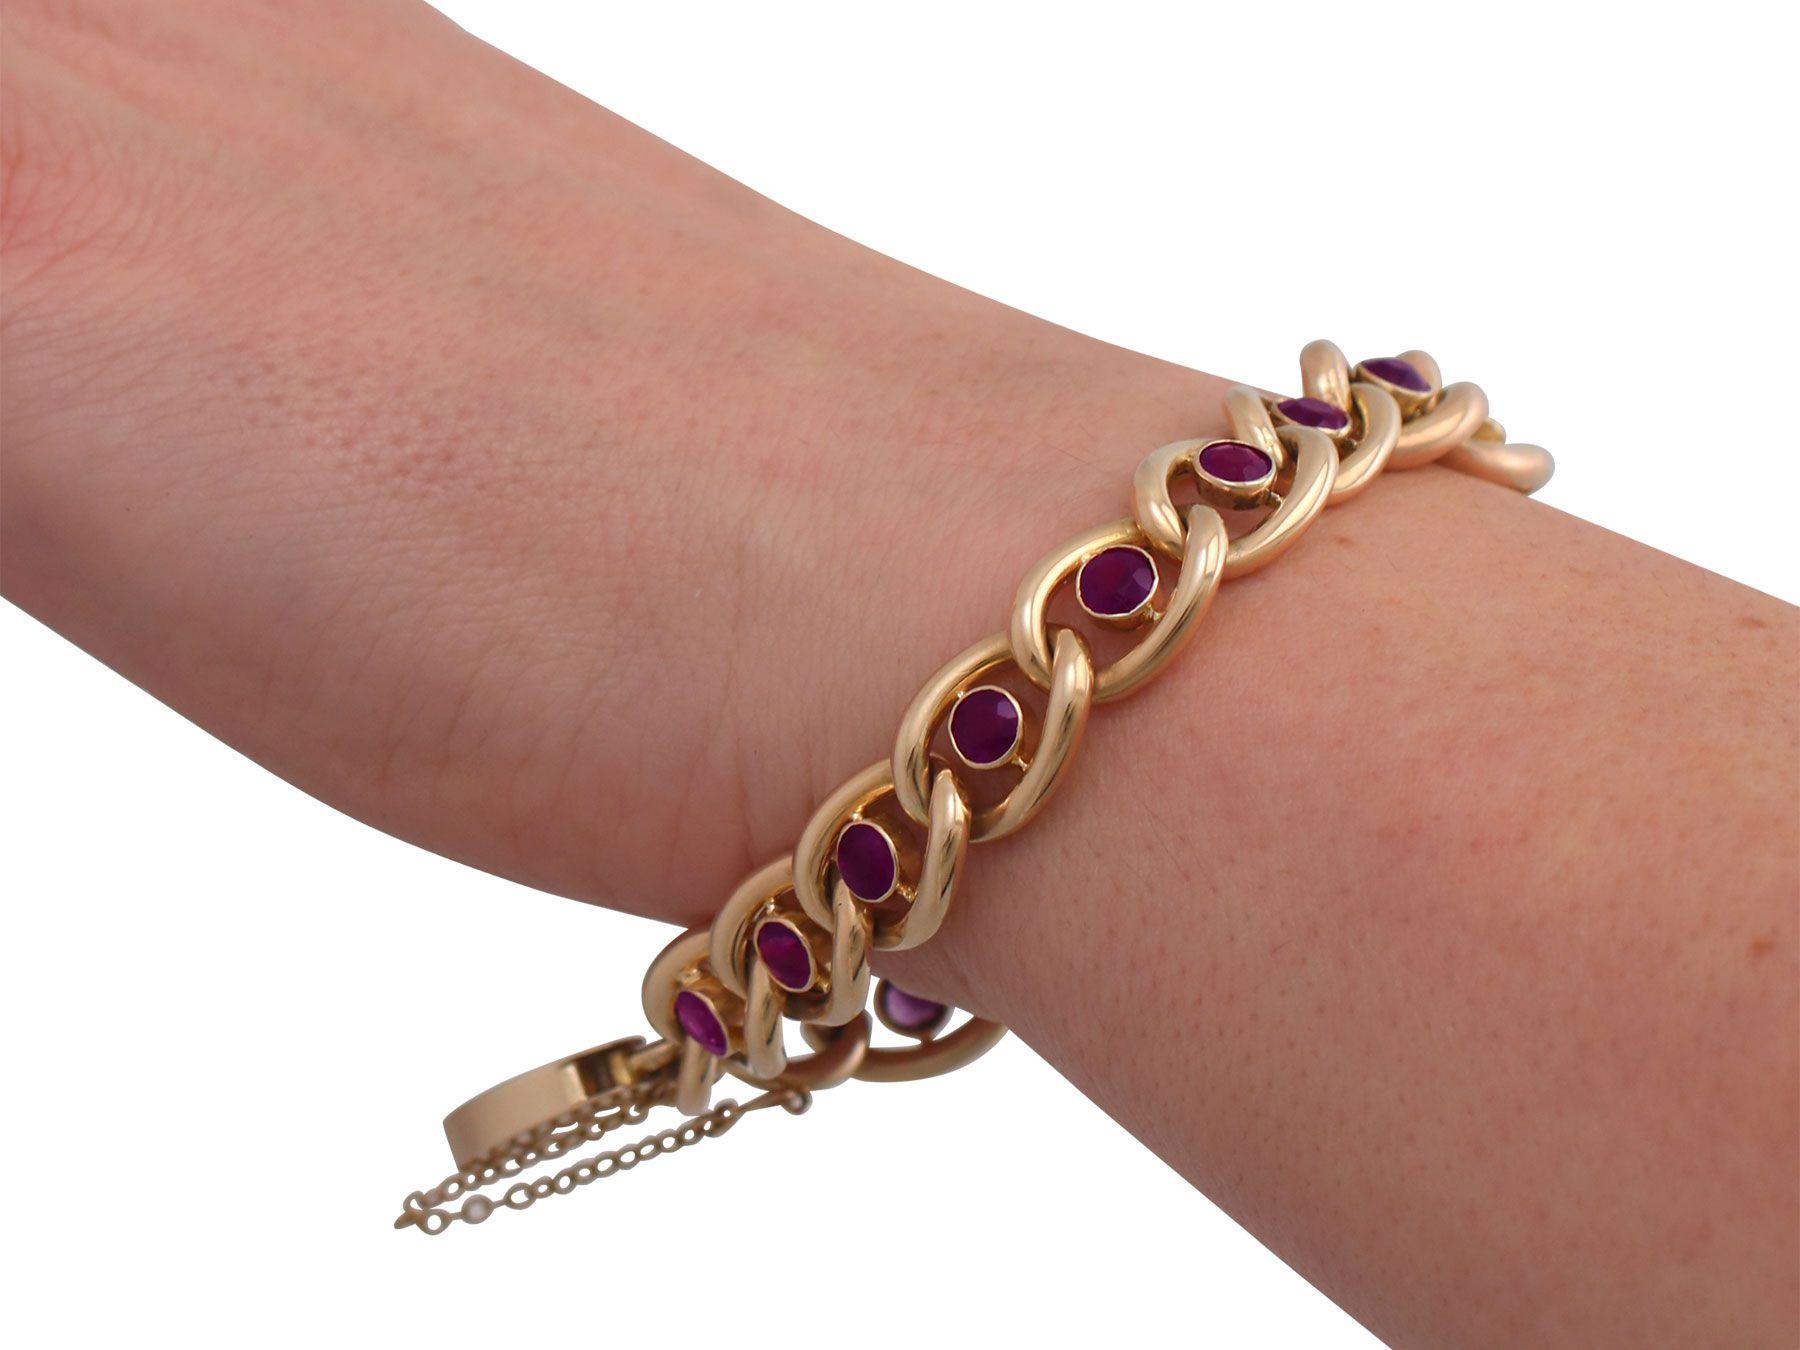 Antique 3.75 Carat Amethyst and Gold Bracelet with Heart Padlock Clasp For Sale 5